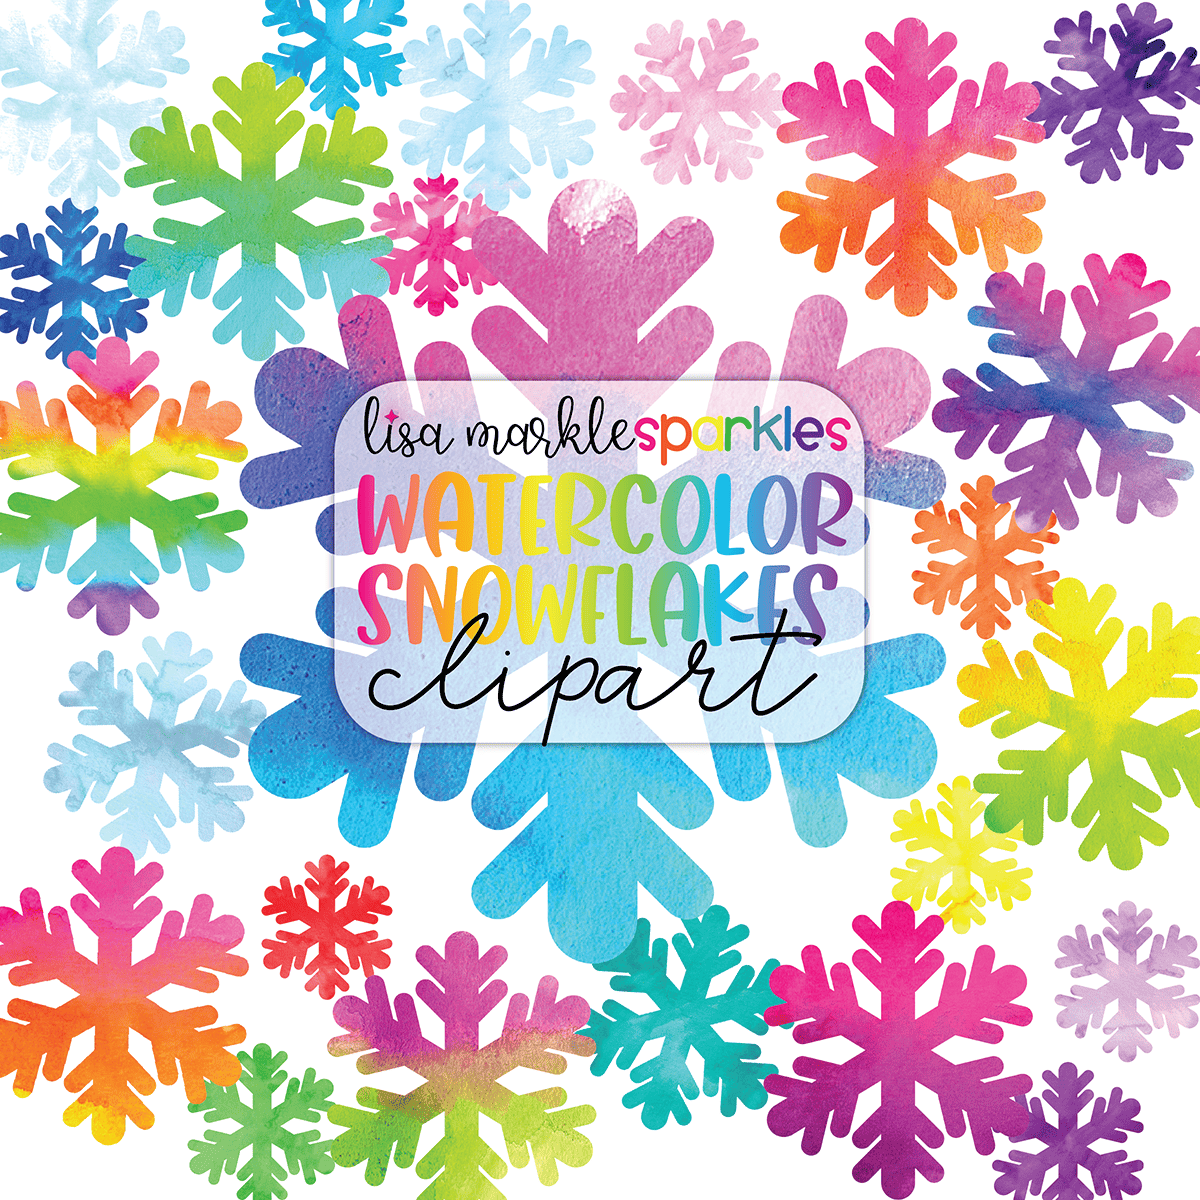 White snowflakes clipart, Black snowflake clip art, Winter holiday clipart